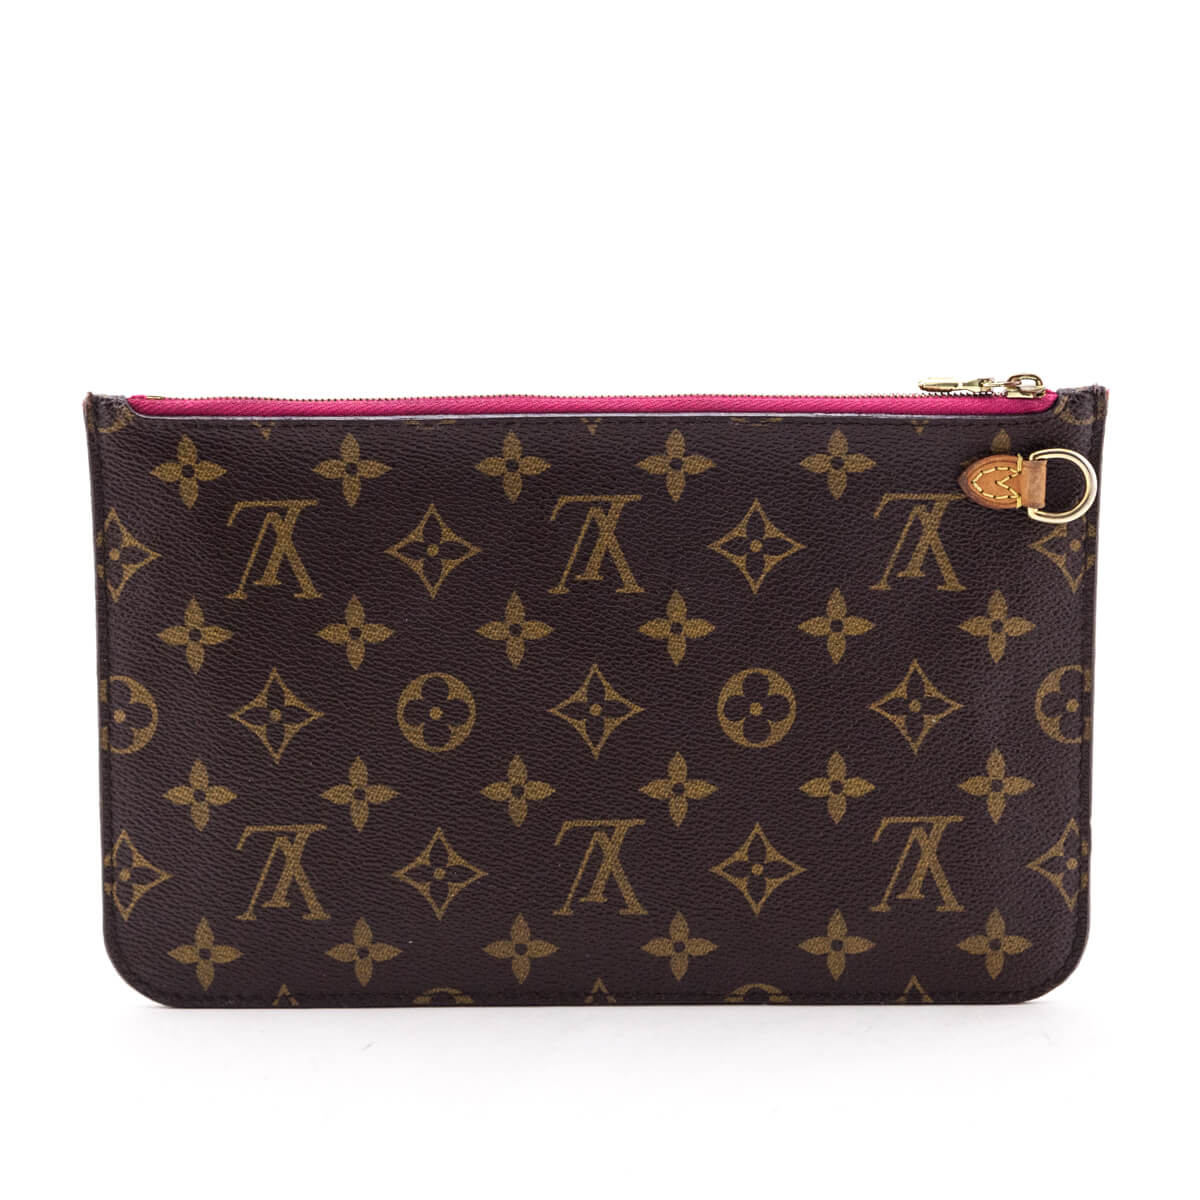 Louis Vuitton Monogram Neverfull MM Pouch - Love that Bag etc - Preowned Authentic Designer Handbags & Preloved Fashions